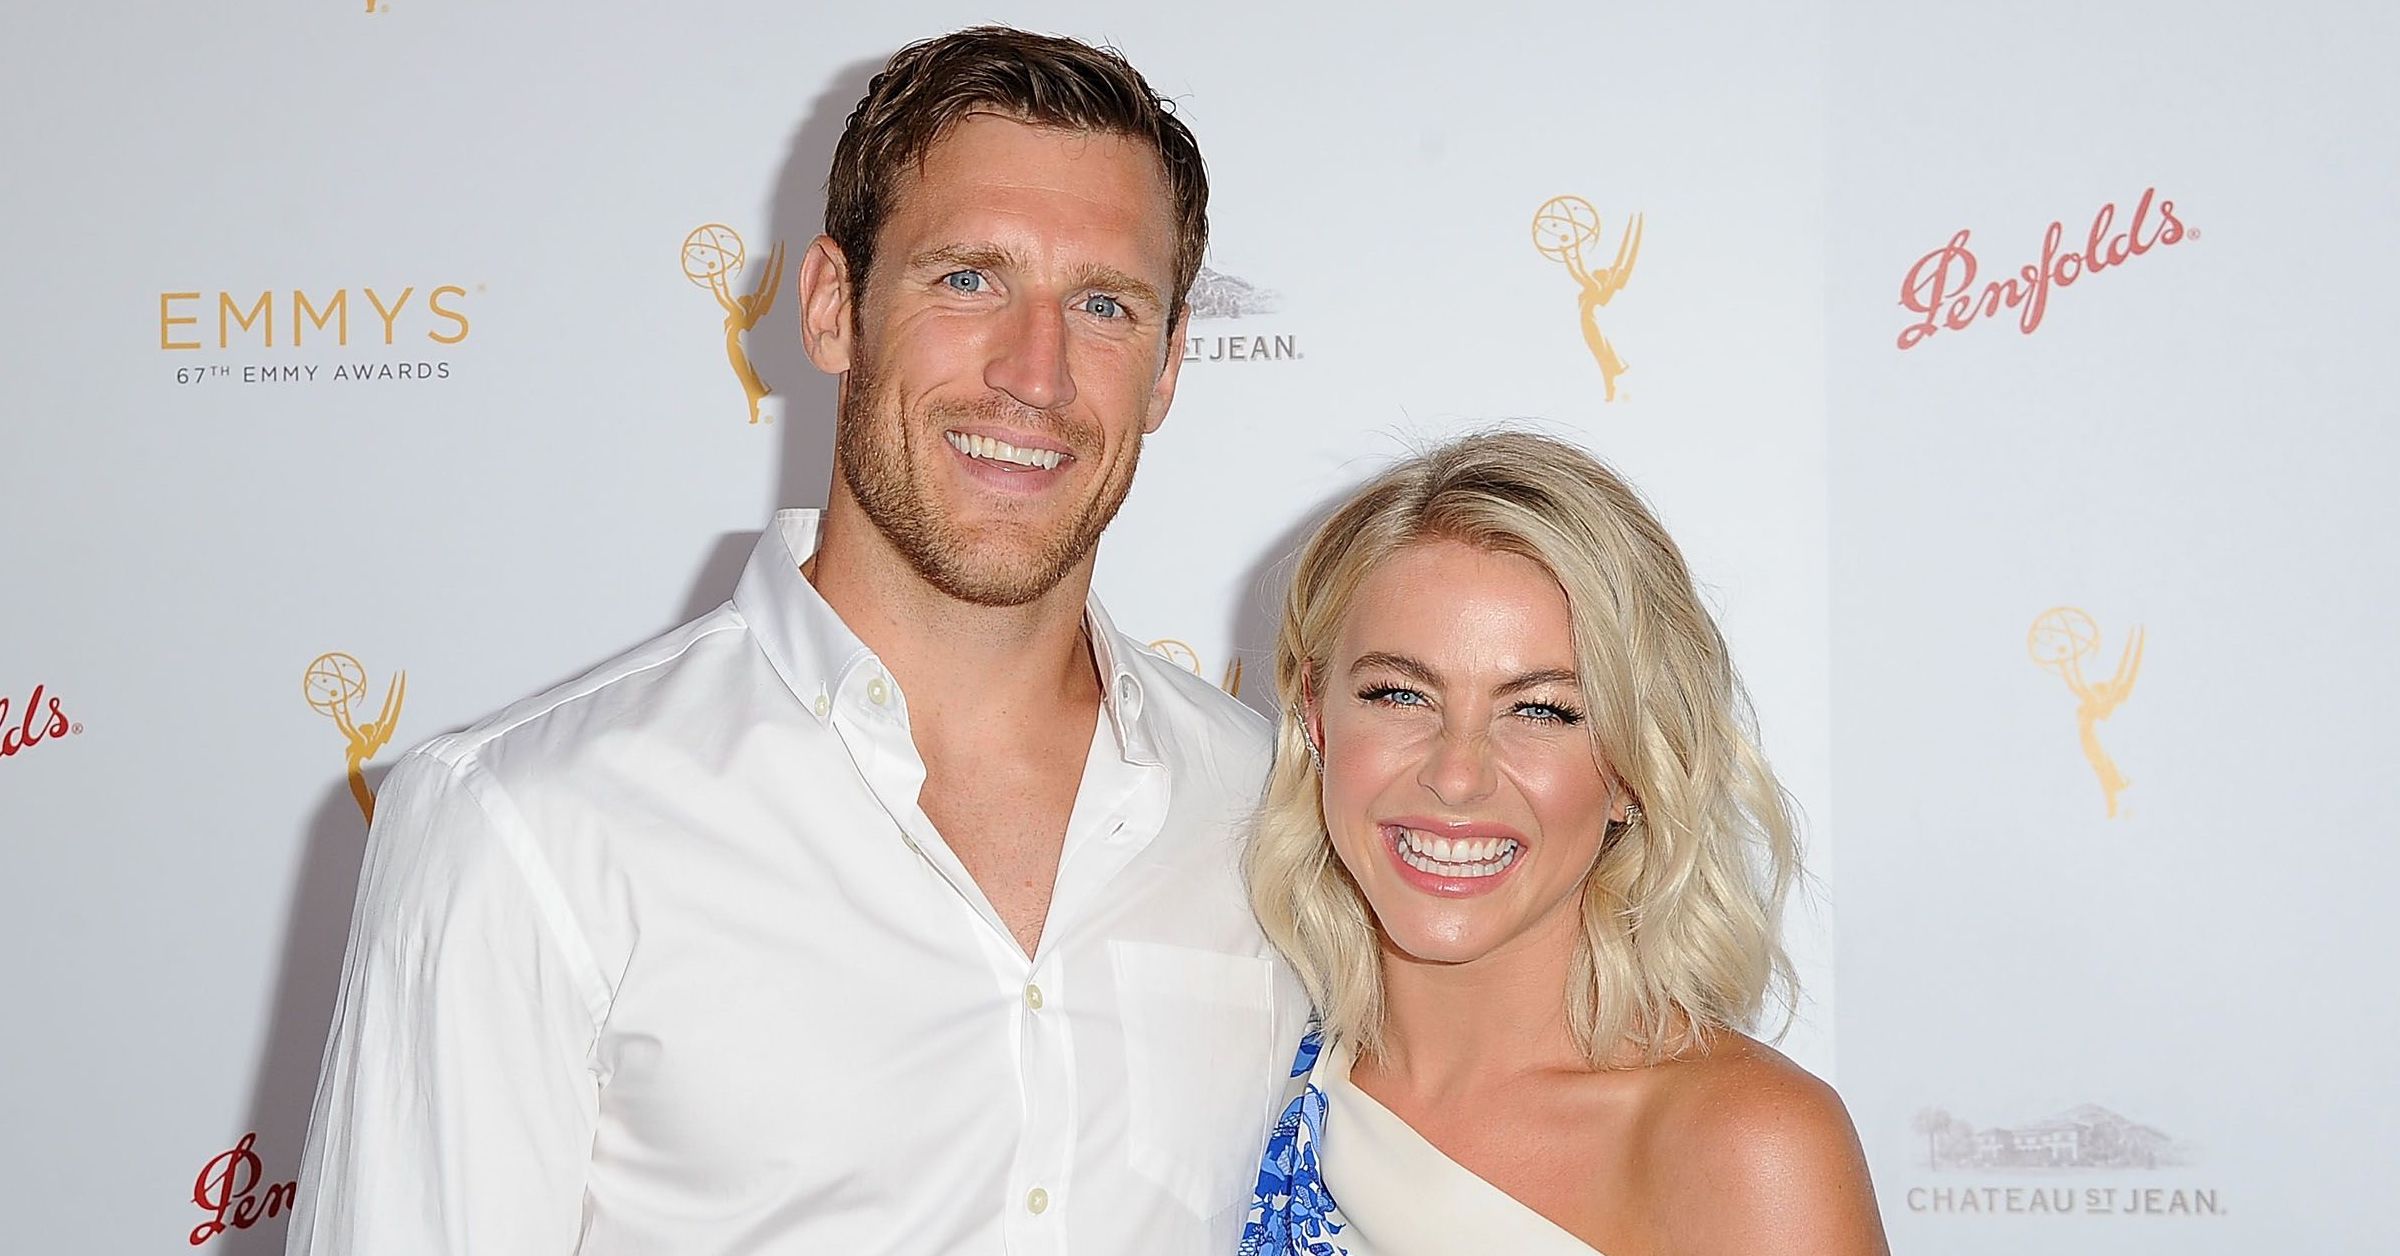 Julianne Hough Shares Message About The Evolution Of Love Amid Brooks Laich Breakup Rumors